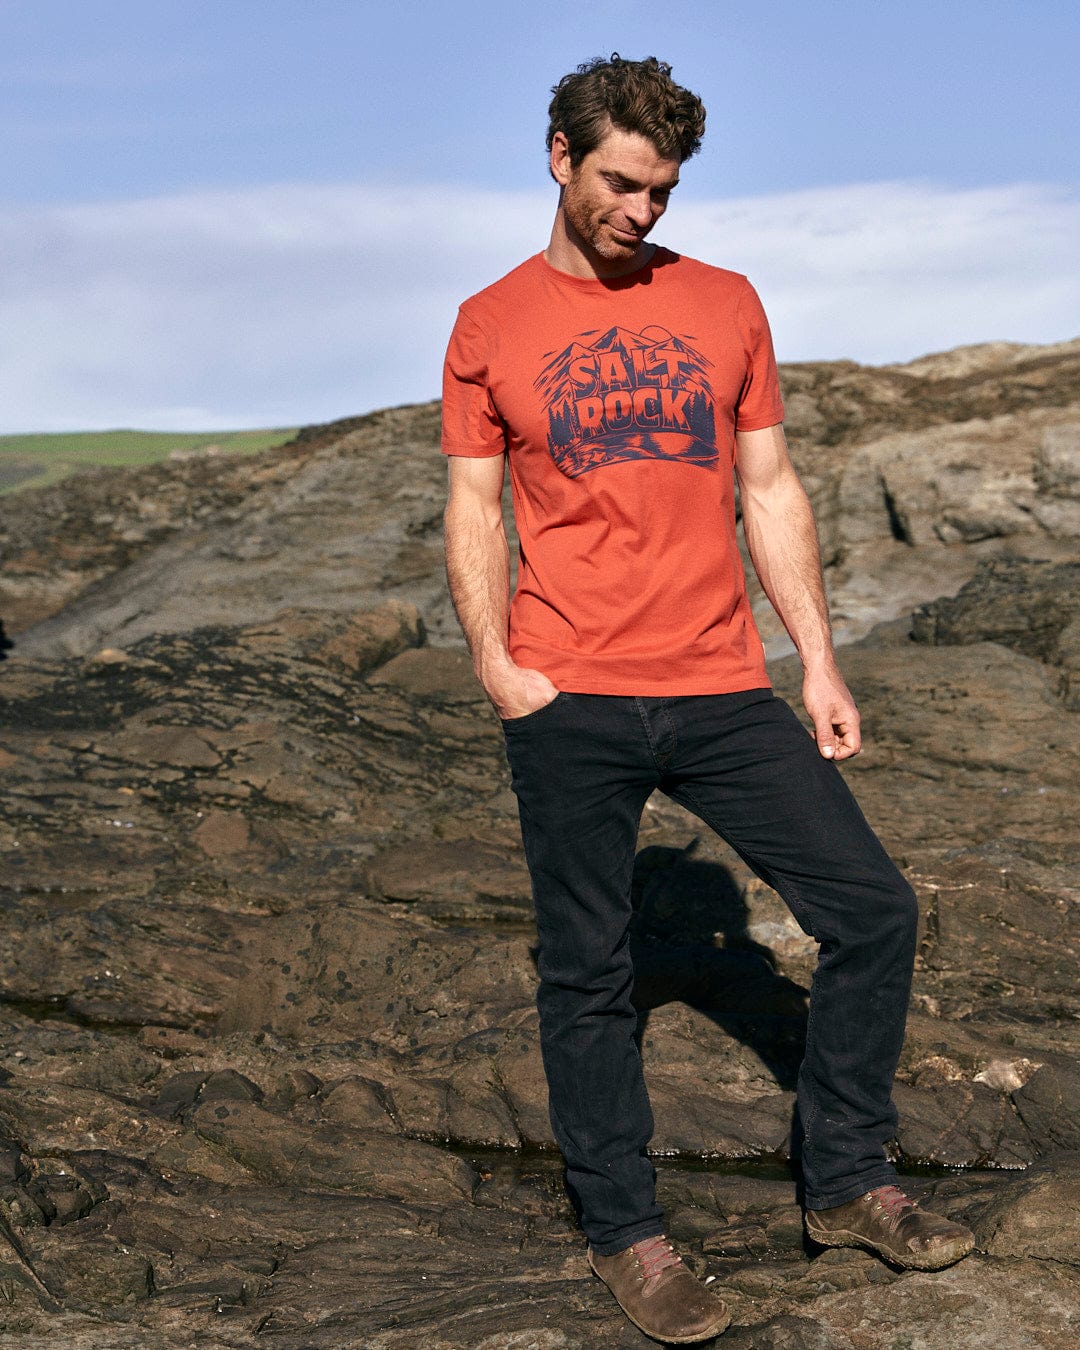 A stylish man in a Saltrock Wood Carve Logo - Mens Short Sleeve T-Shirt - Red standing on rocks in a mountain scene.